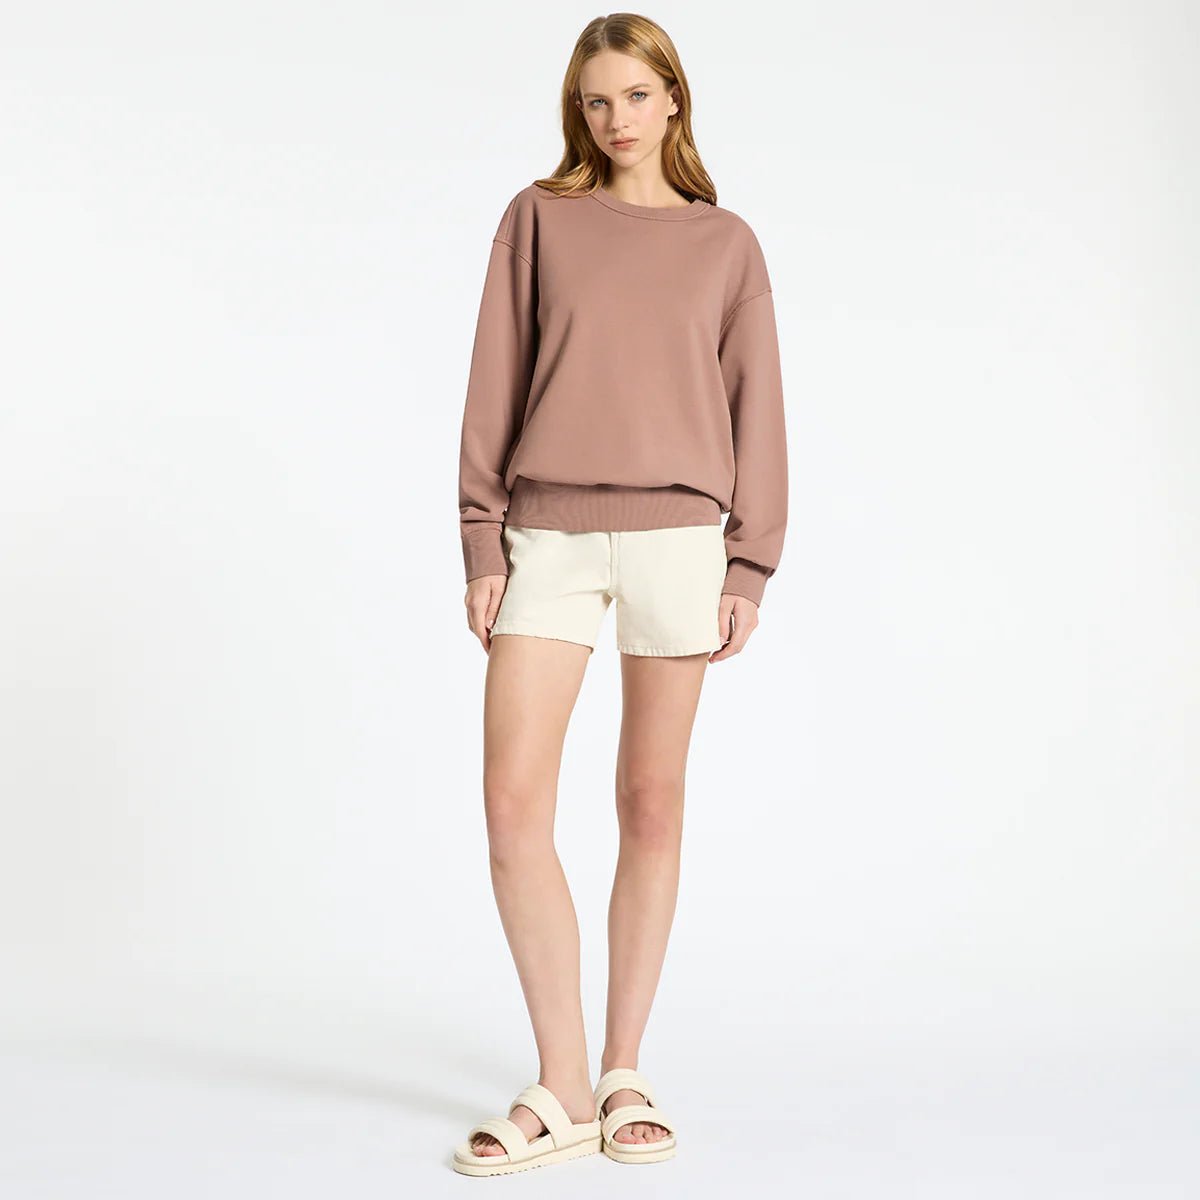 COULD BE NICE WOMEN'S CLASSIC CREW // Dusty Rose ~ Status Anxiety ~